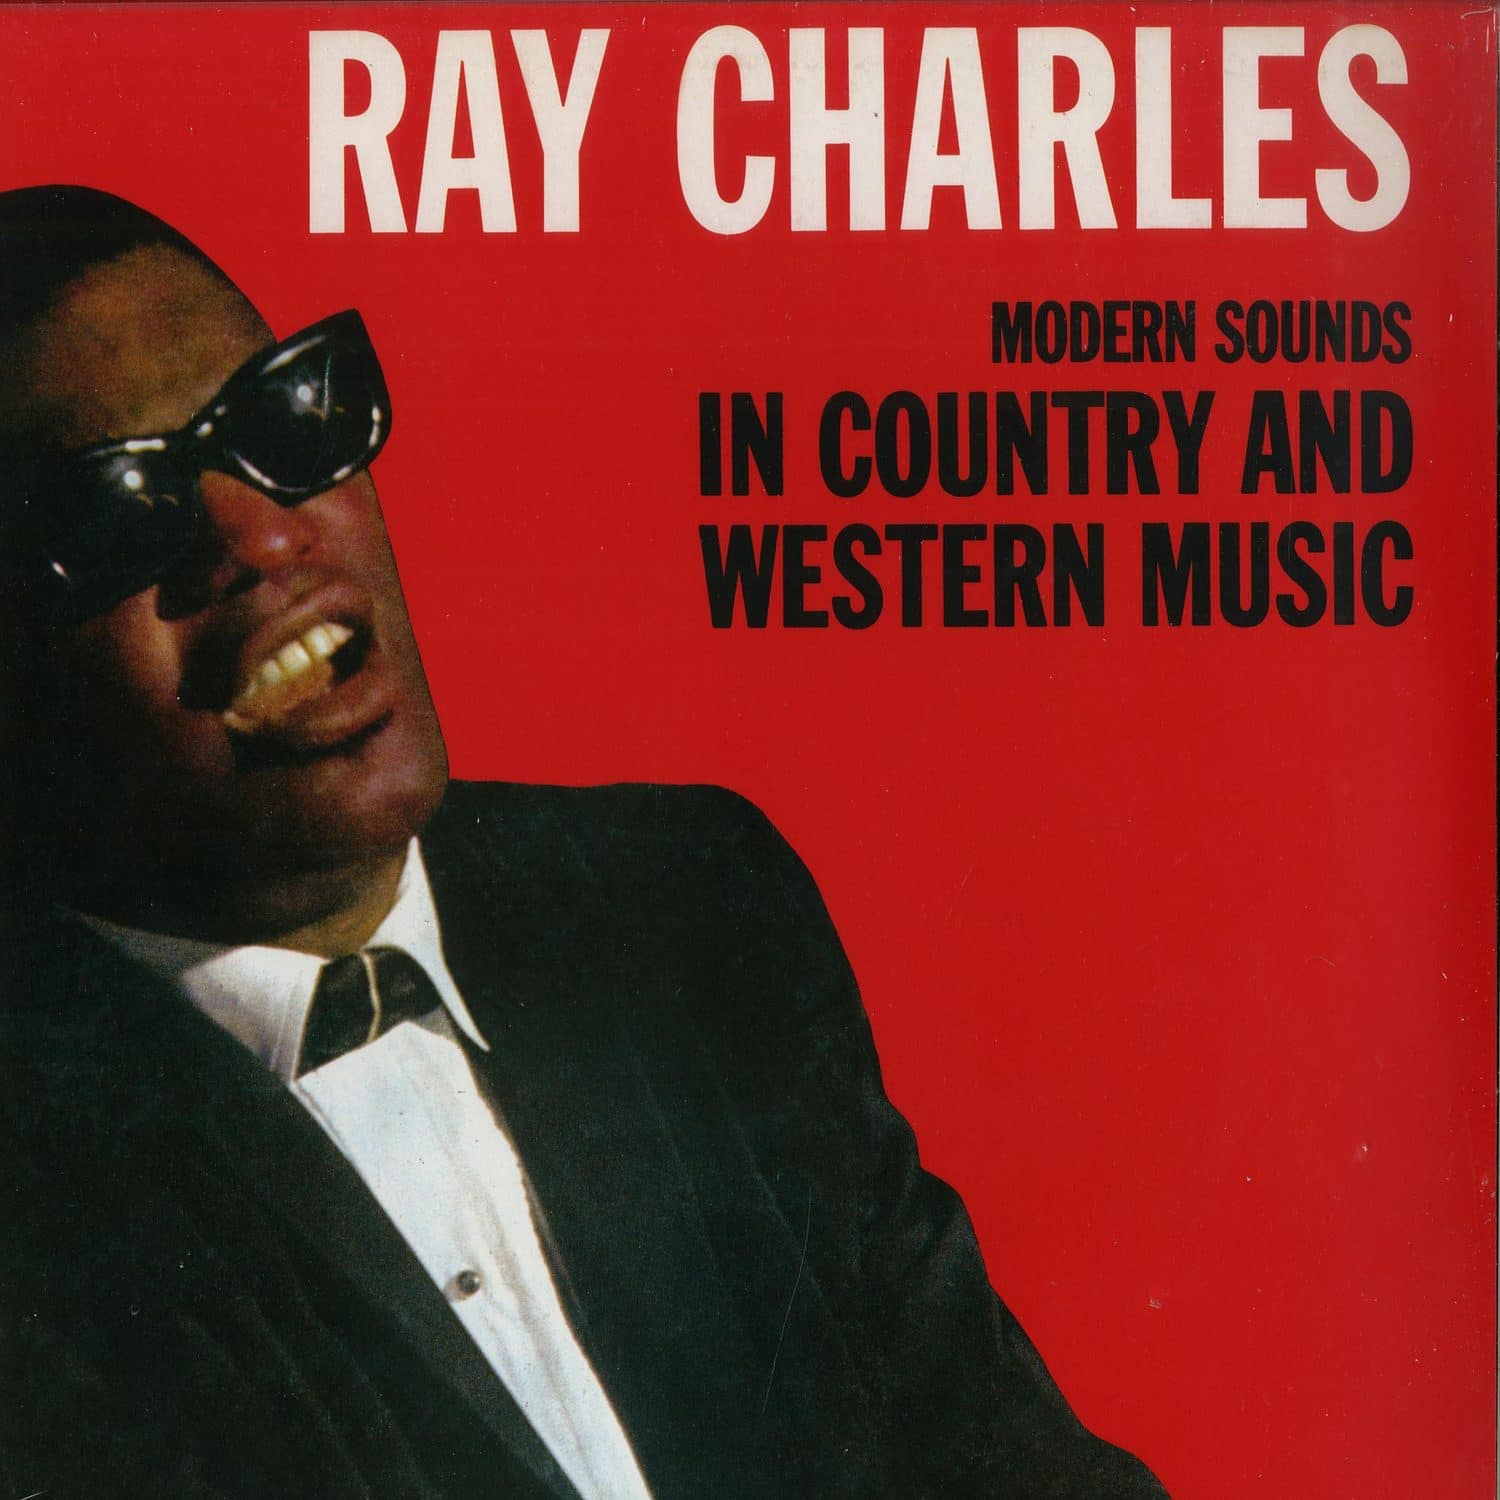 Ray Charles - MODERN SOUNDS IN COUNTRY AND WESTERN MUSIC 